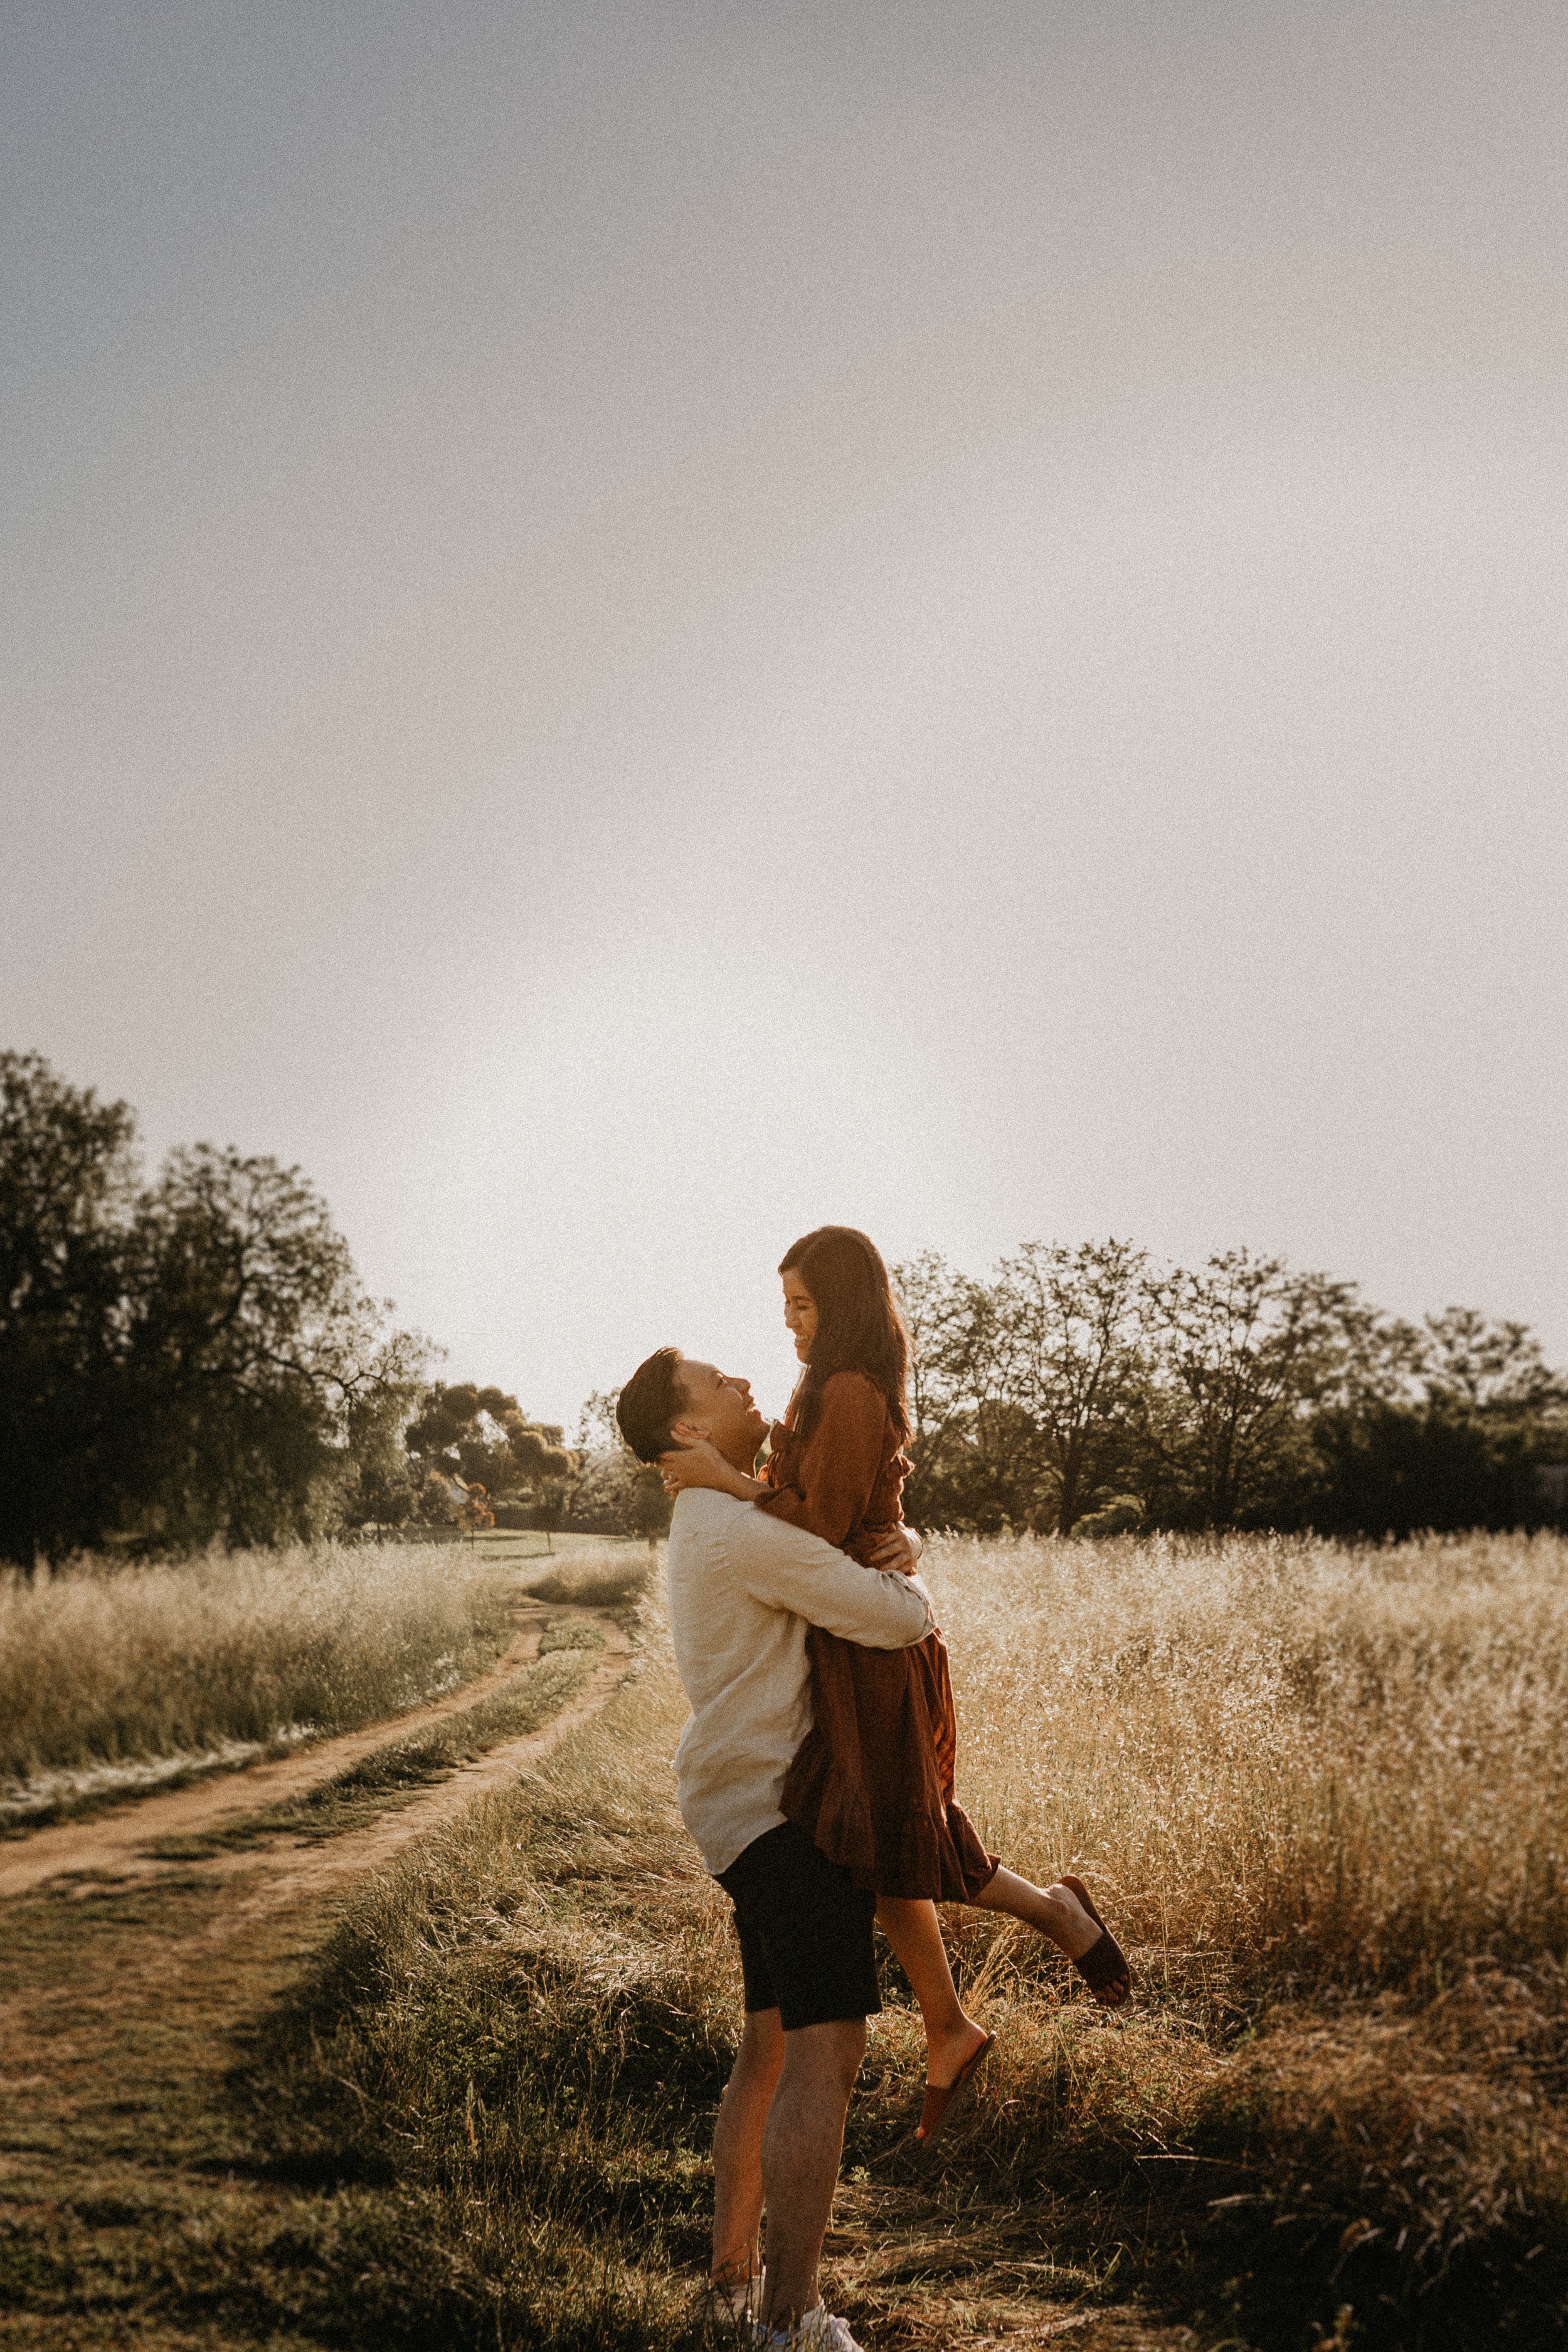 Melton and Bacchus Marsh Couples Photography, Timeless Paige Photography